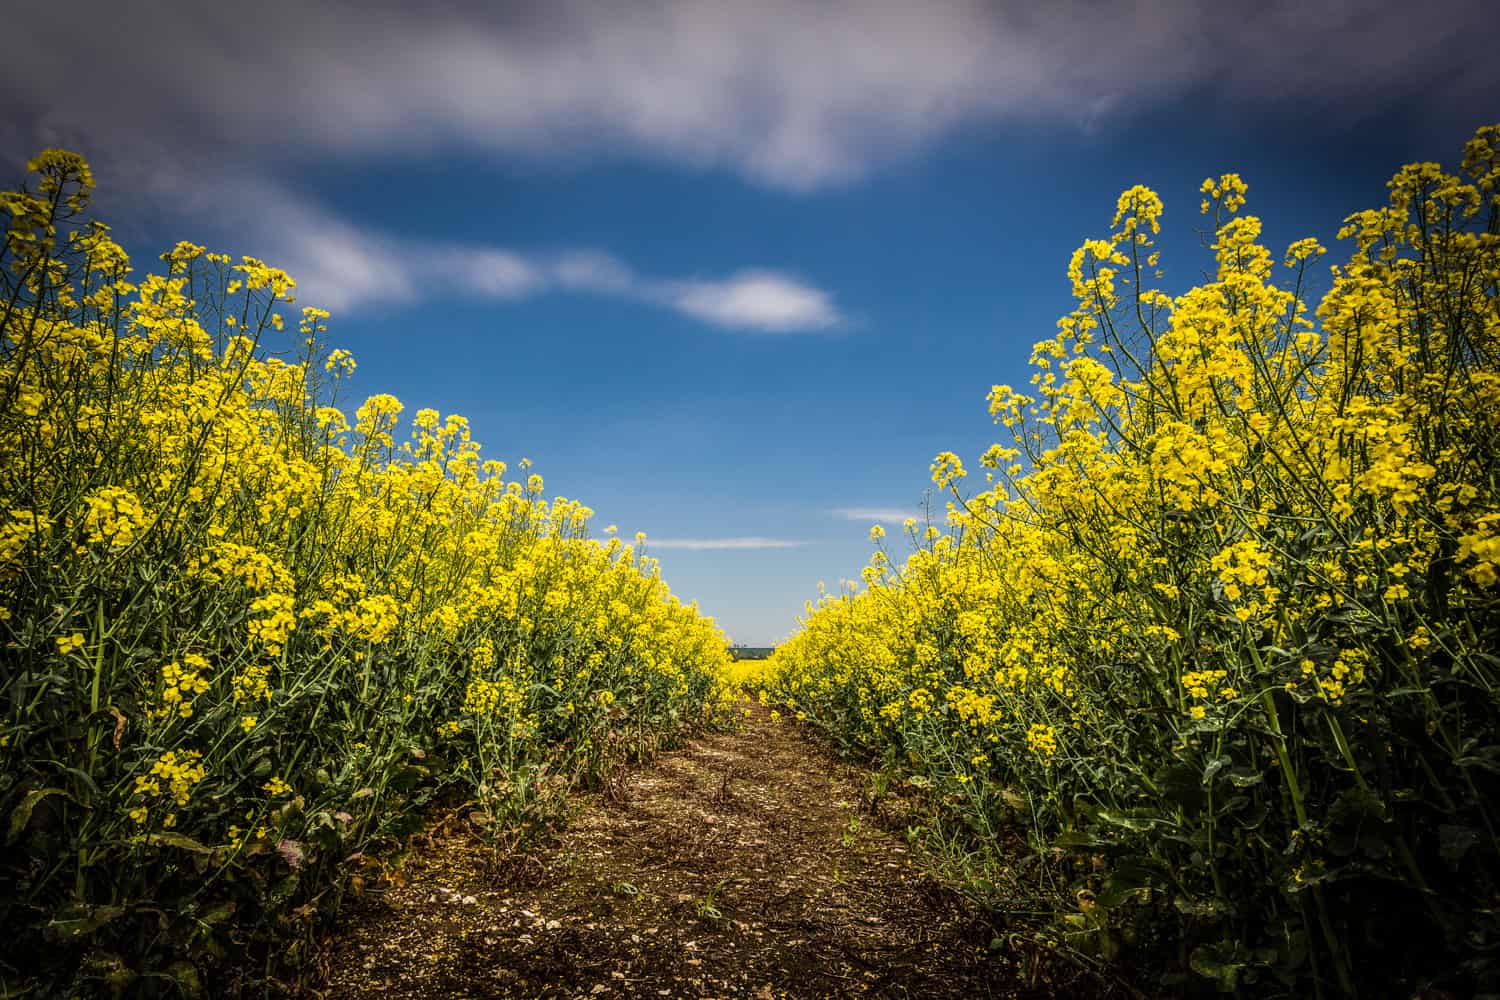  Hampshire Photography - Re-edit of the yellow field 